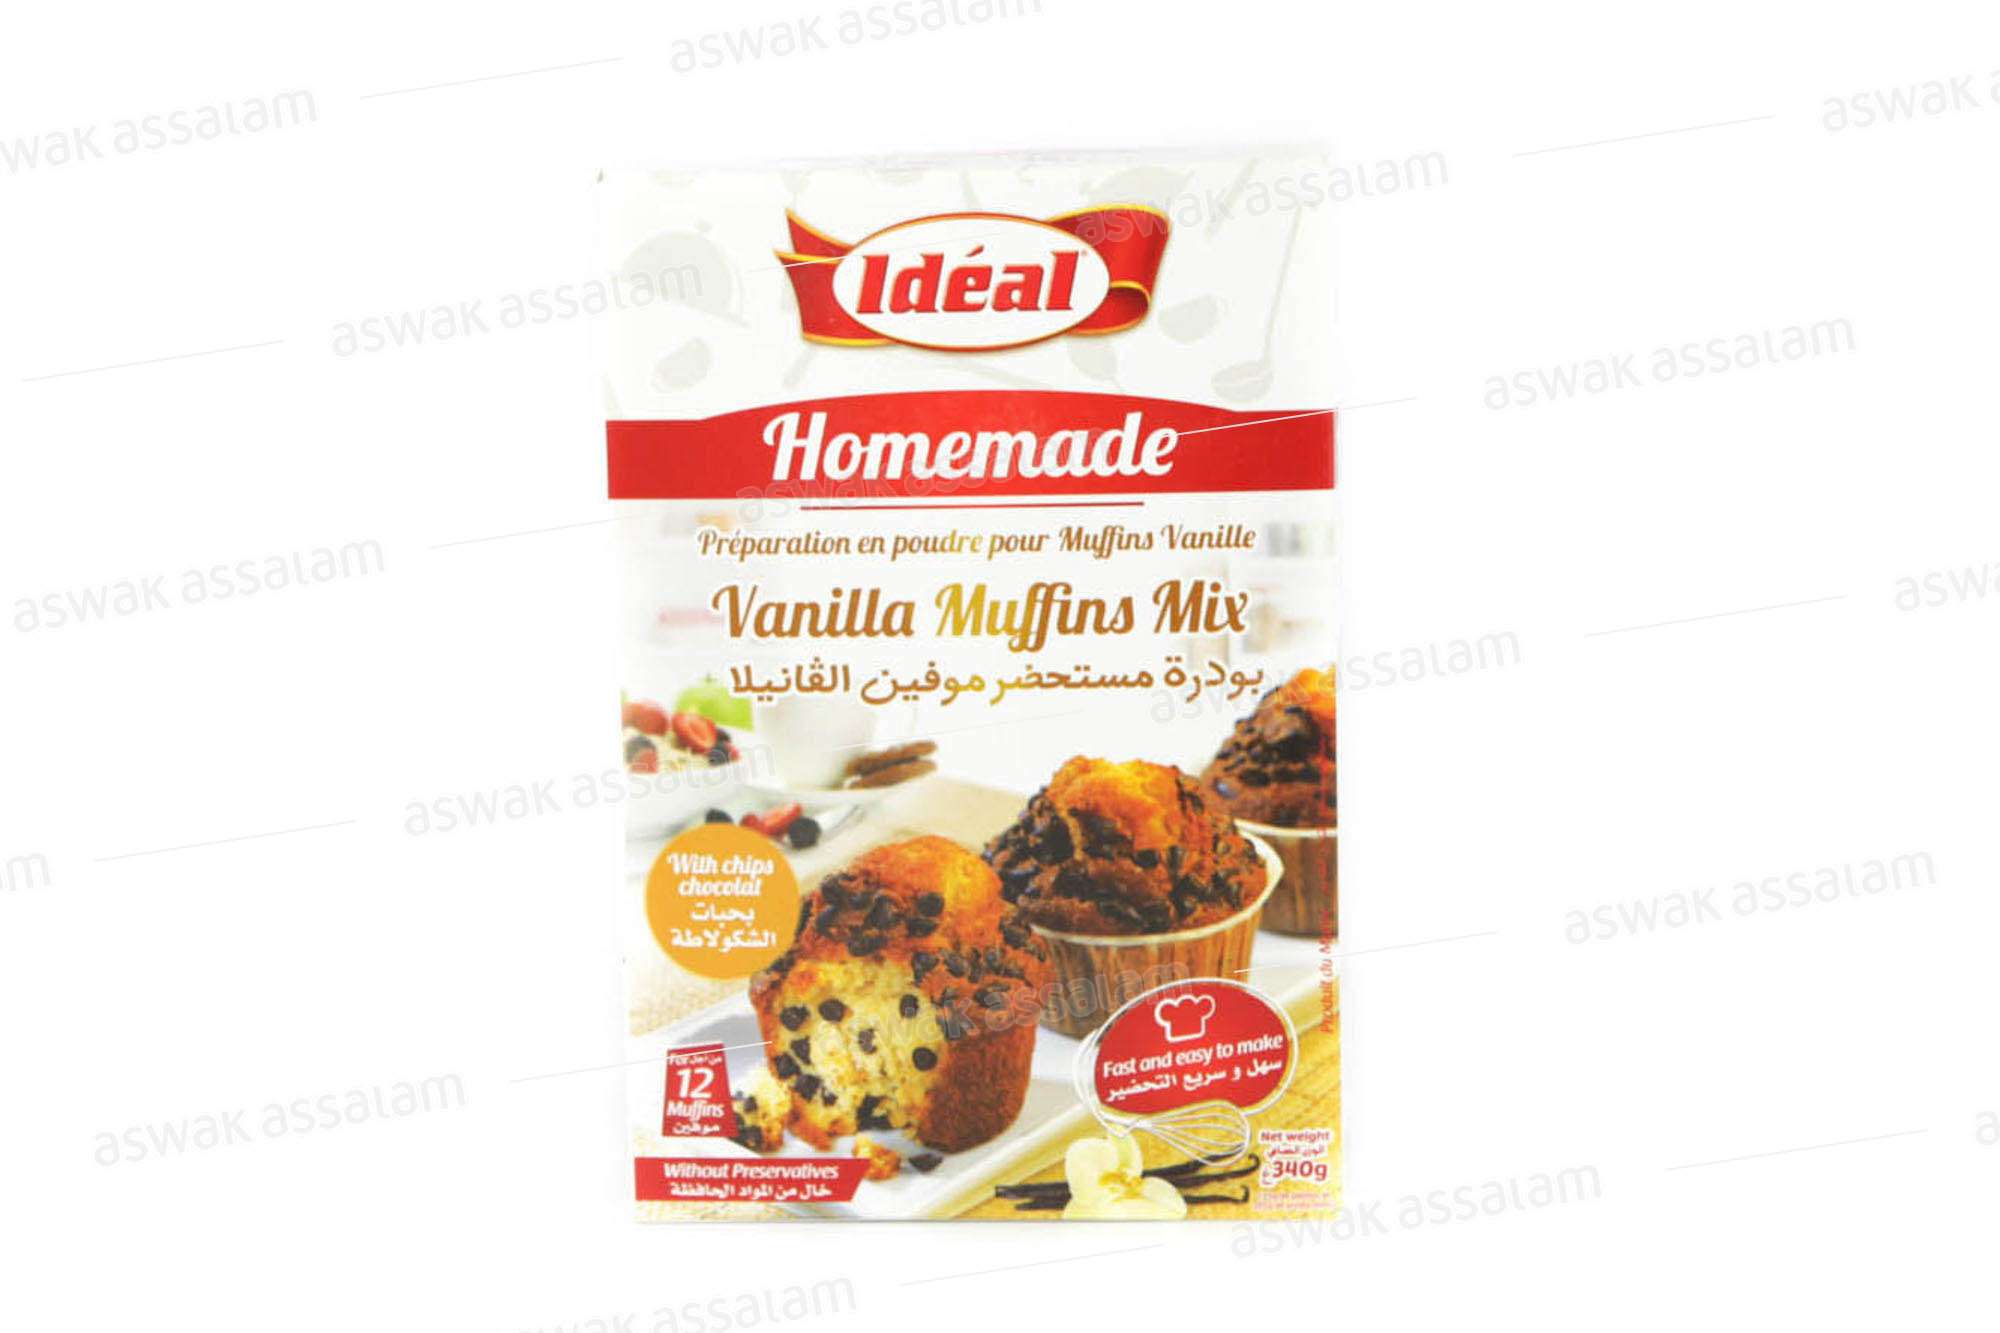 PREPARATION POUDRE MUFFINS VANILLE MIX 350G IDEAL